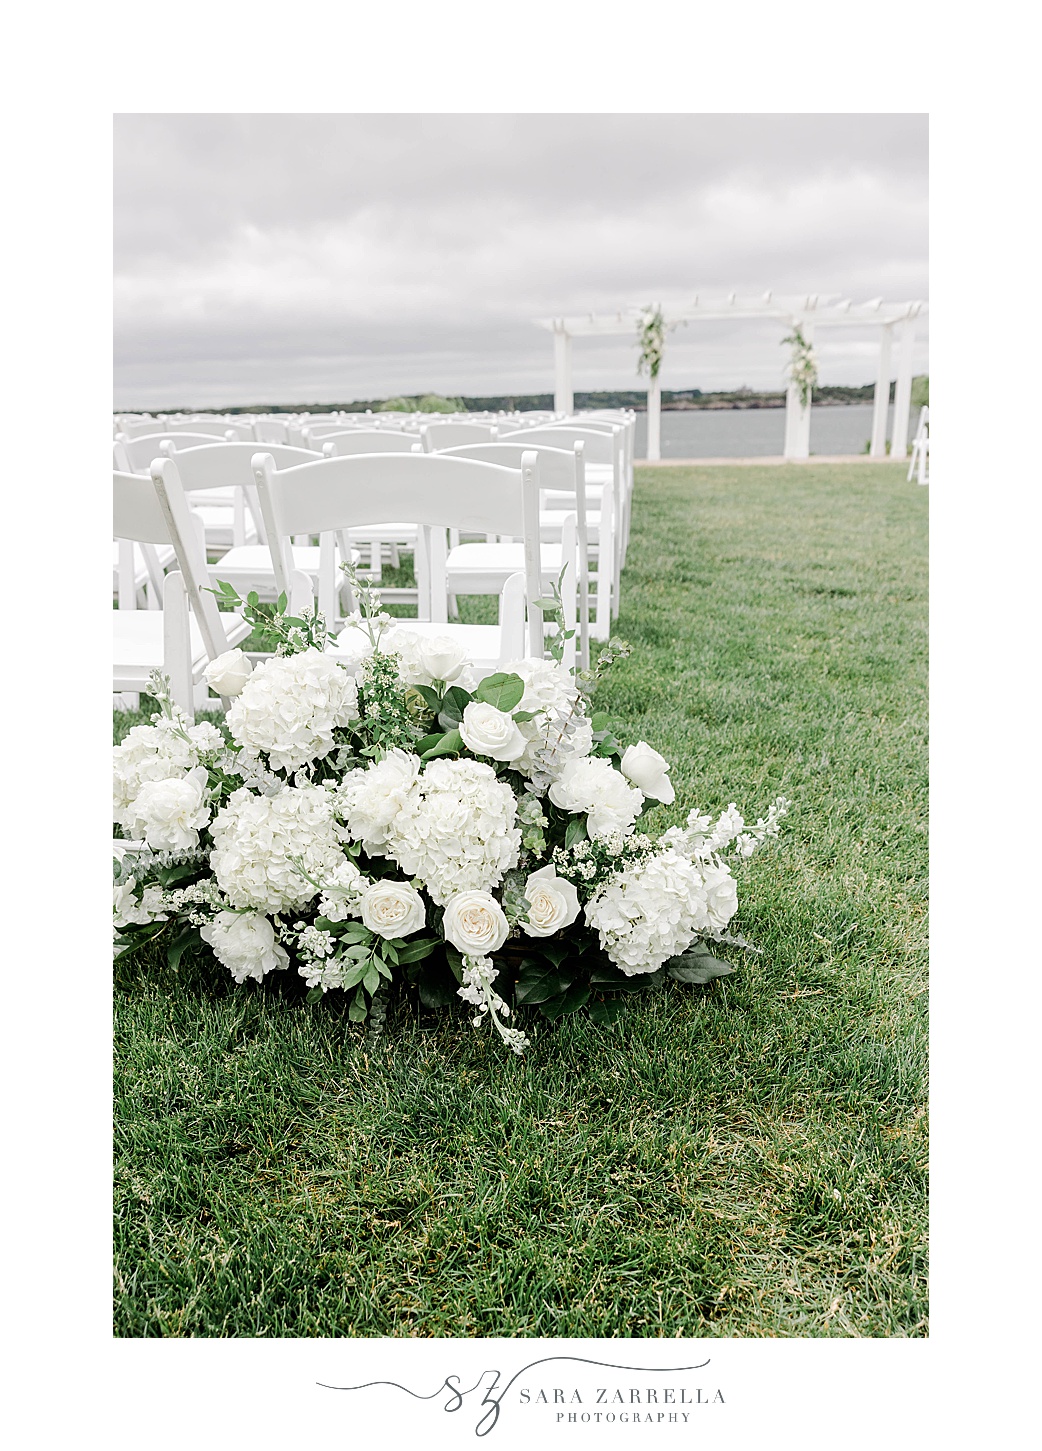 white flowers near chairs for ceremony along water on lawn at OceanCliff Hotel